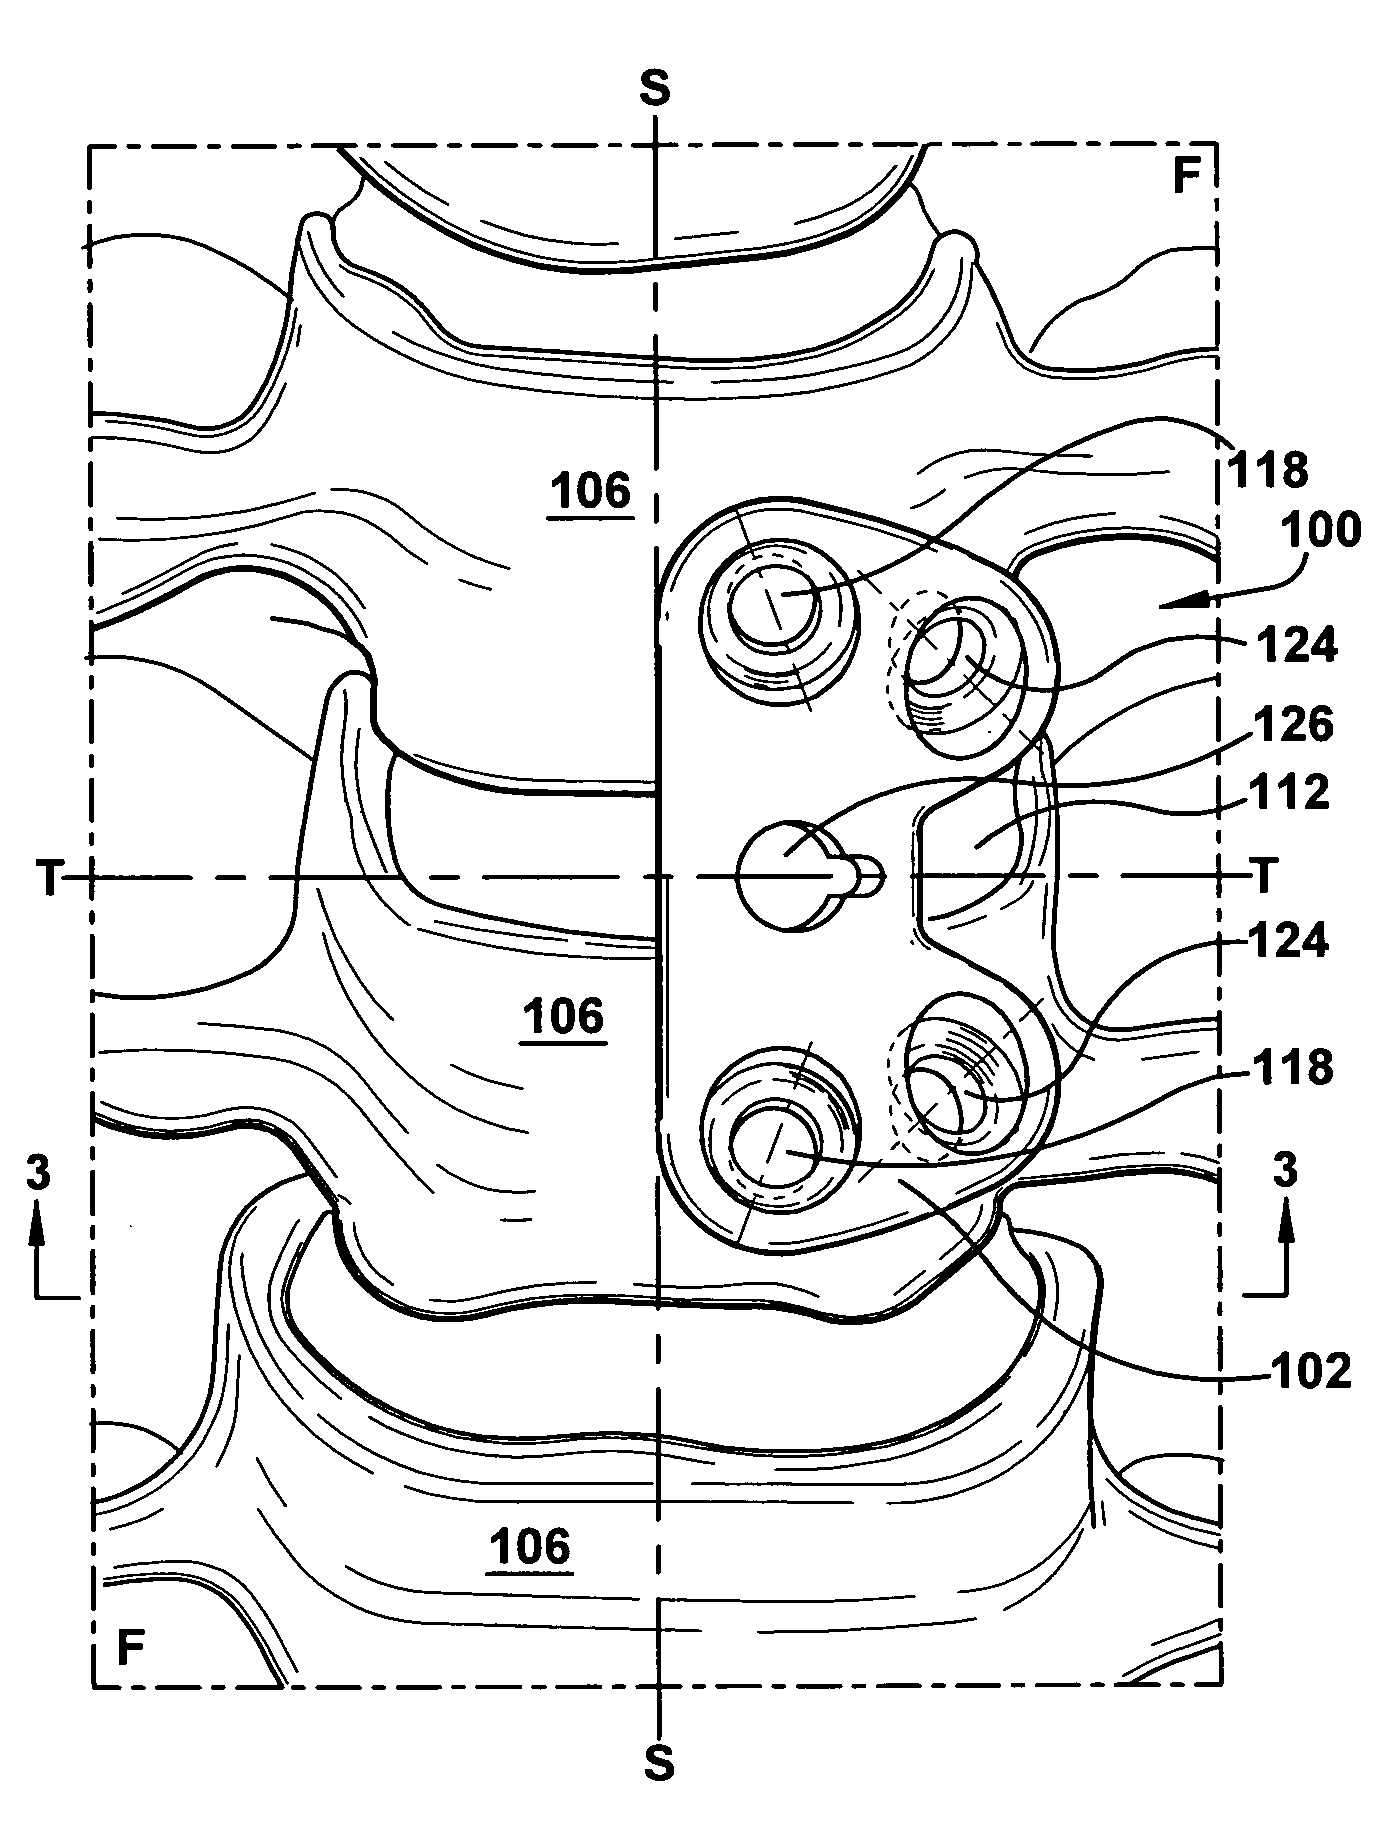 Cervical fusion apparatus and method for use